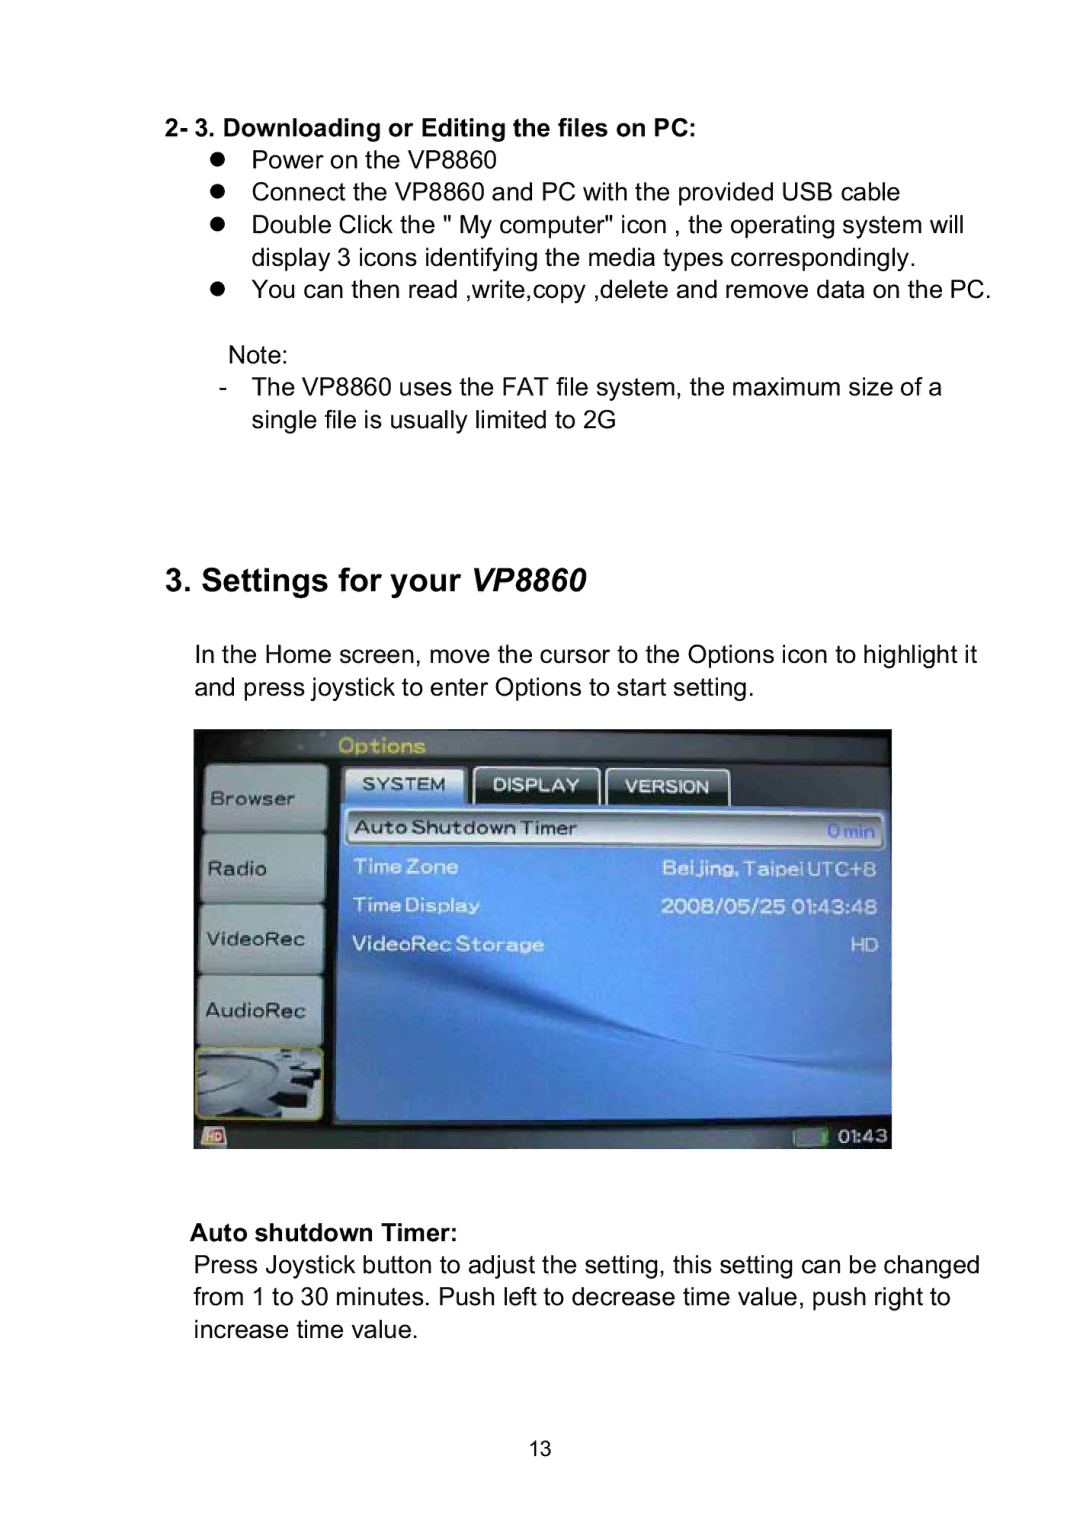 Vosonic manual Settings for your VP8860, Downloading or Editing the files on PC, Auto shutdown Timer 